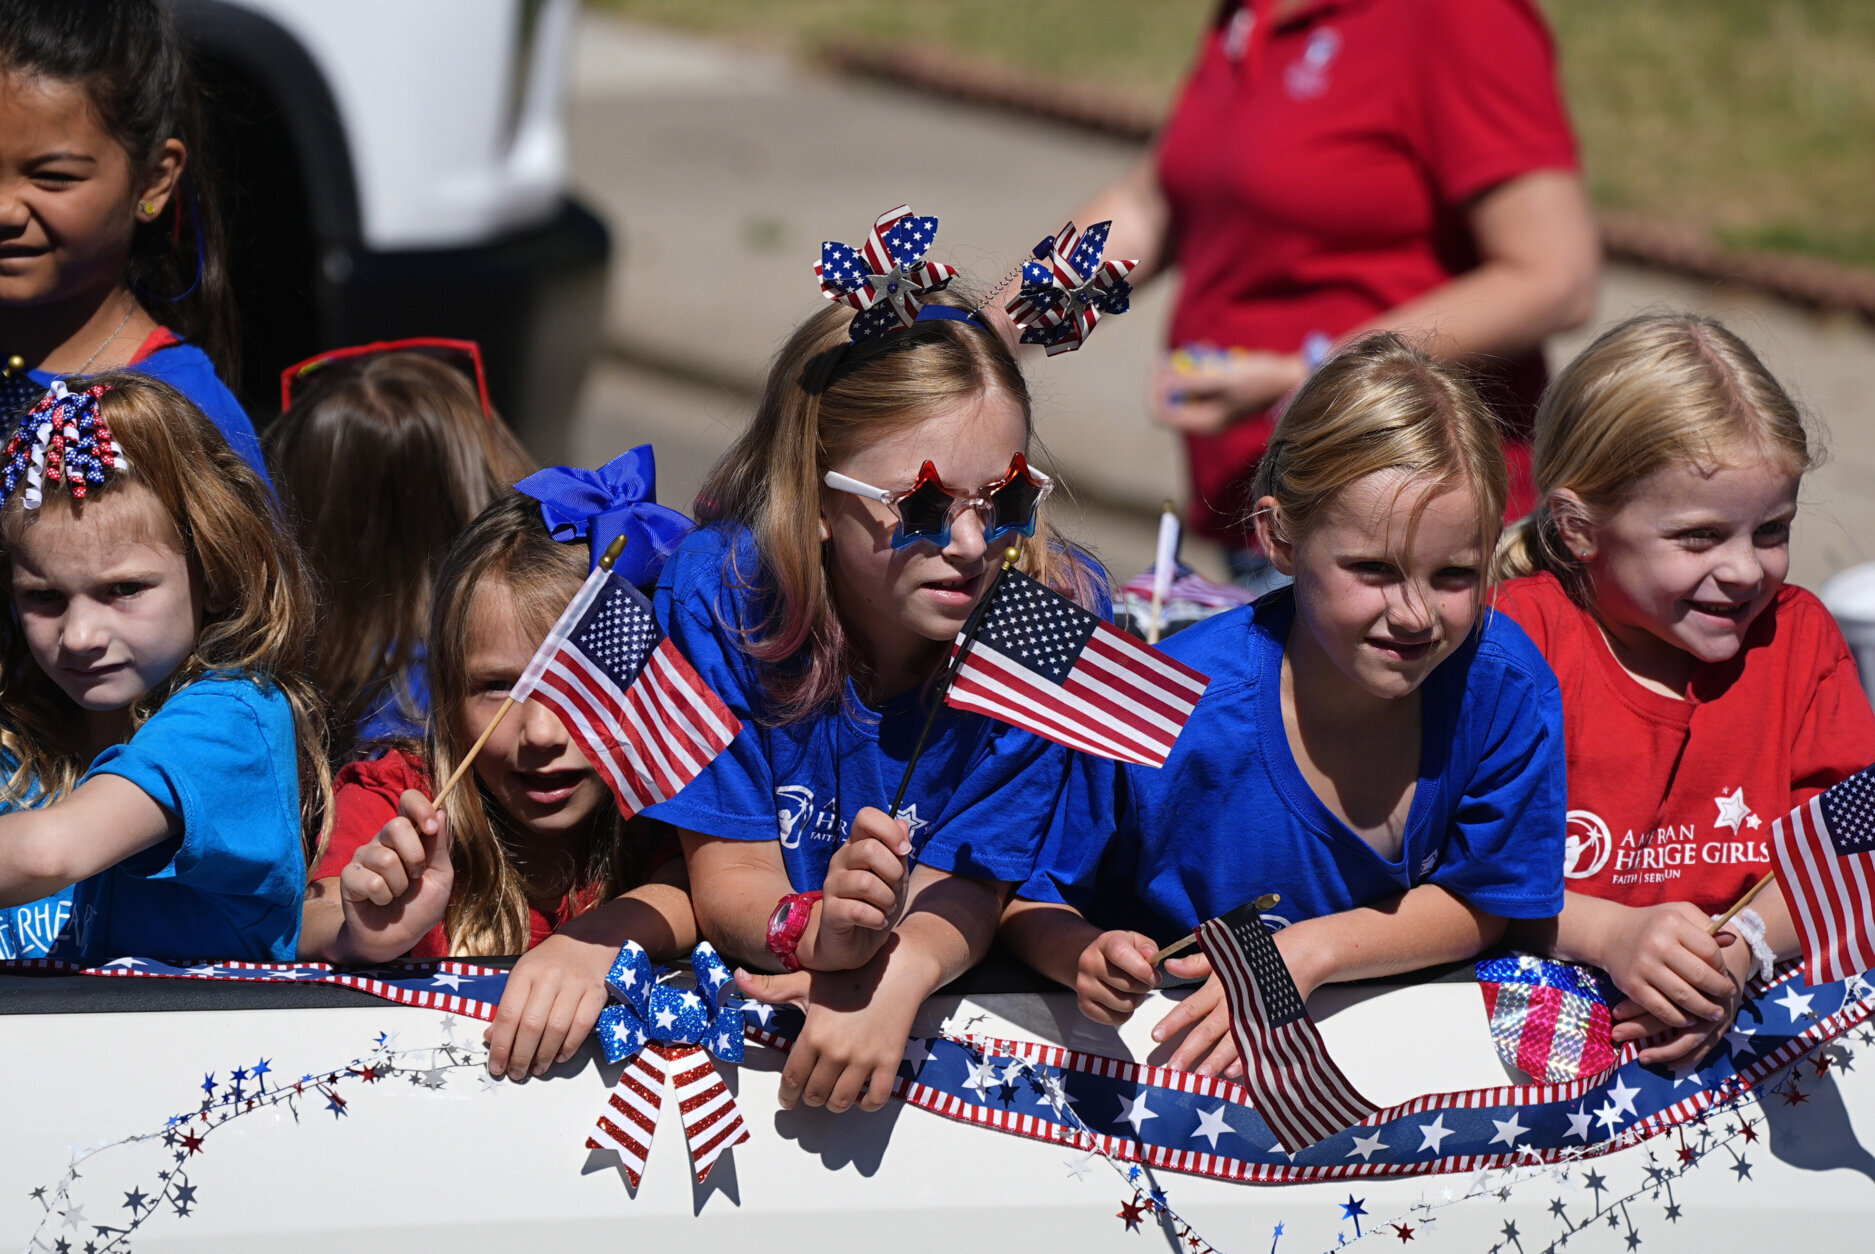 kids huddled together are dressed in red, white and blue, carrying American flags